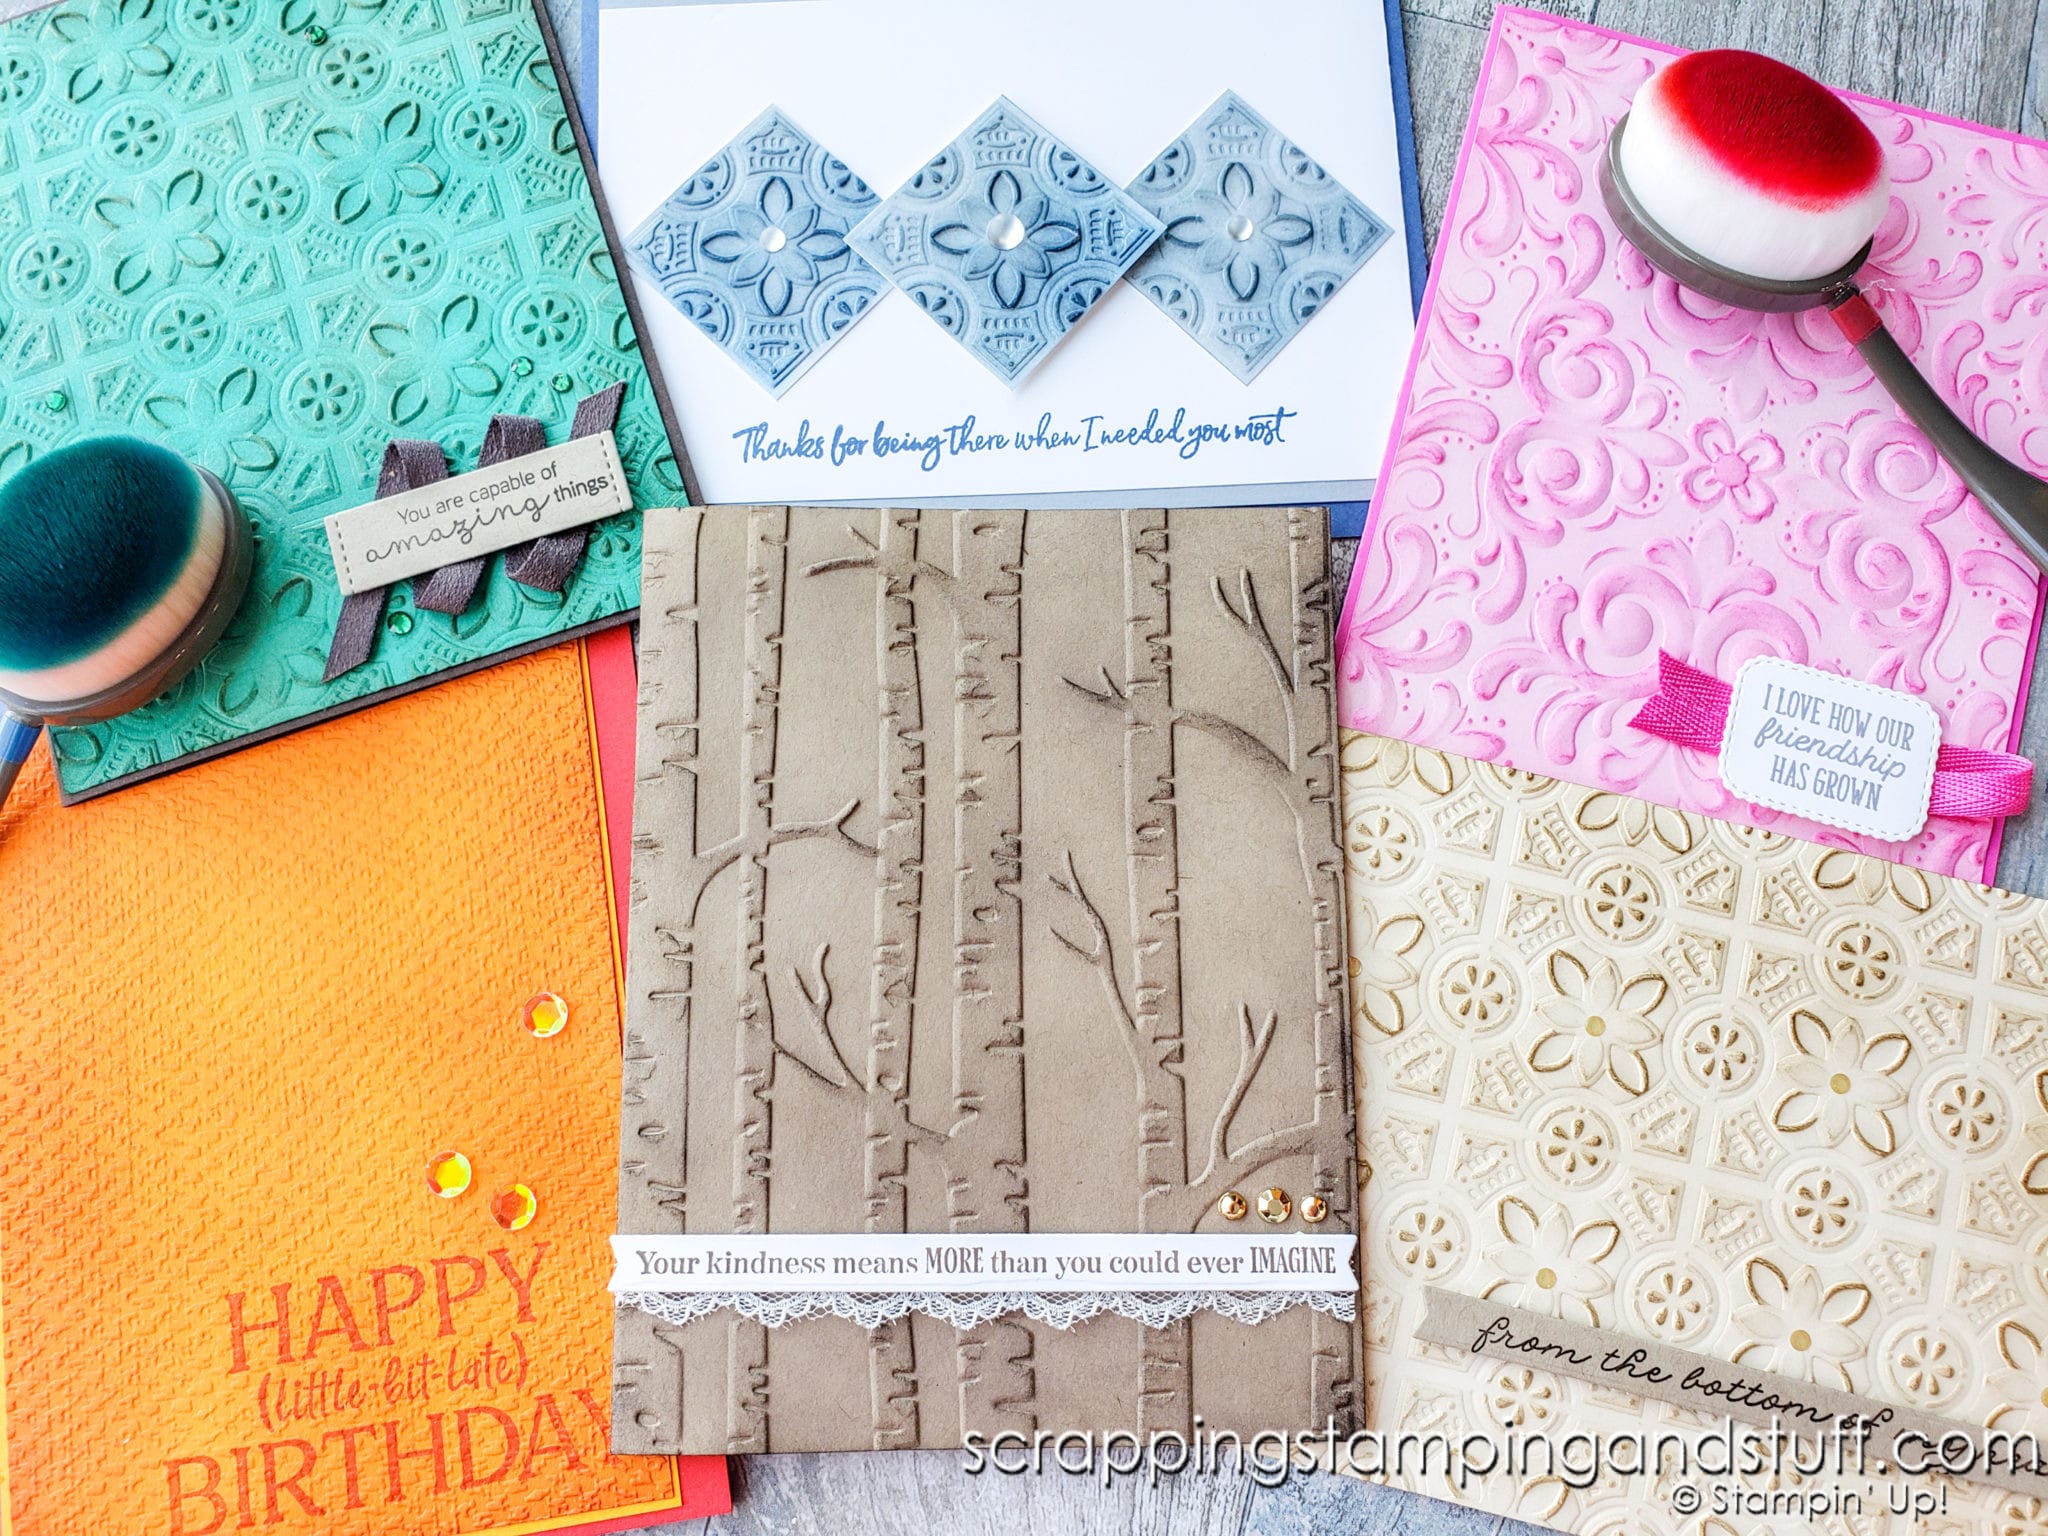 Blending Brushes And Embossing Make For Stunning And Simple Cards